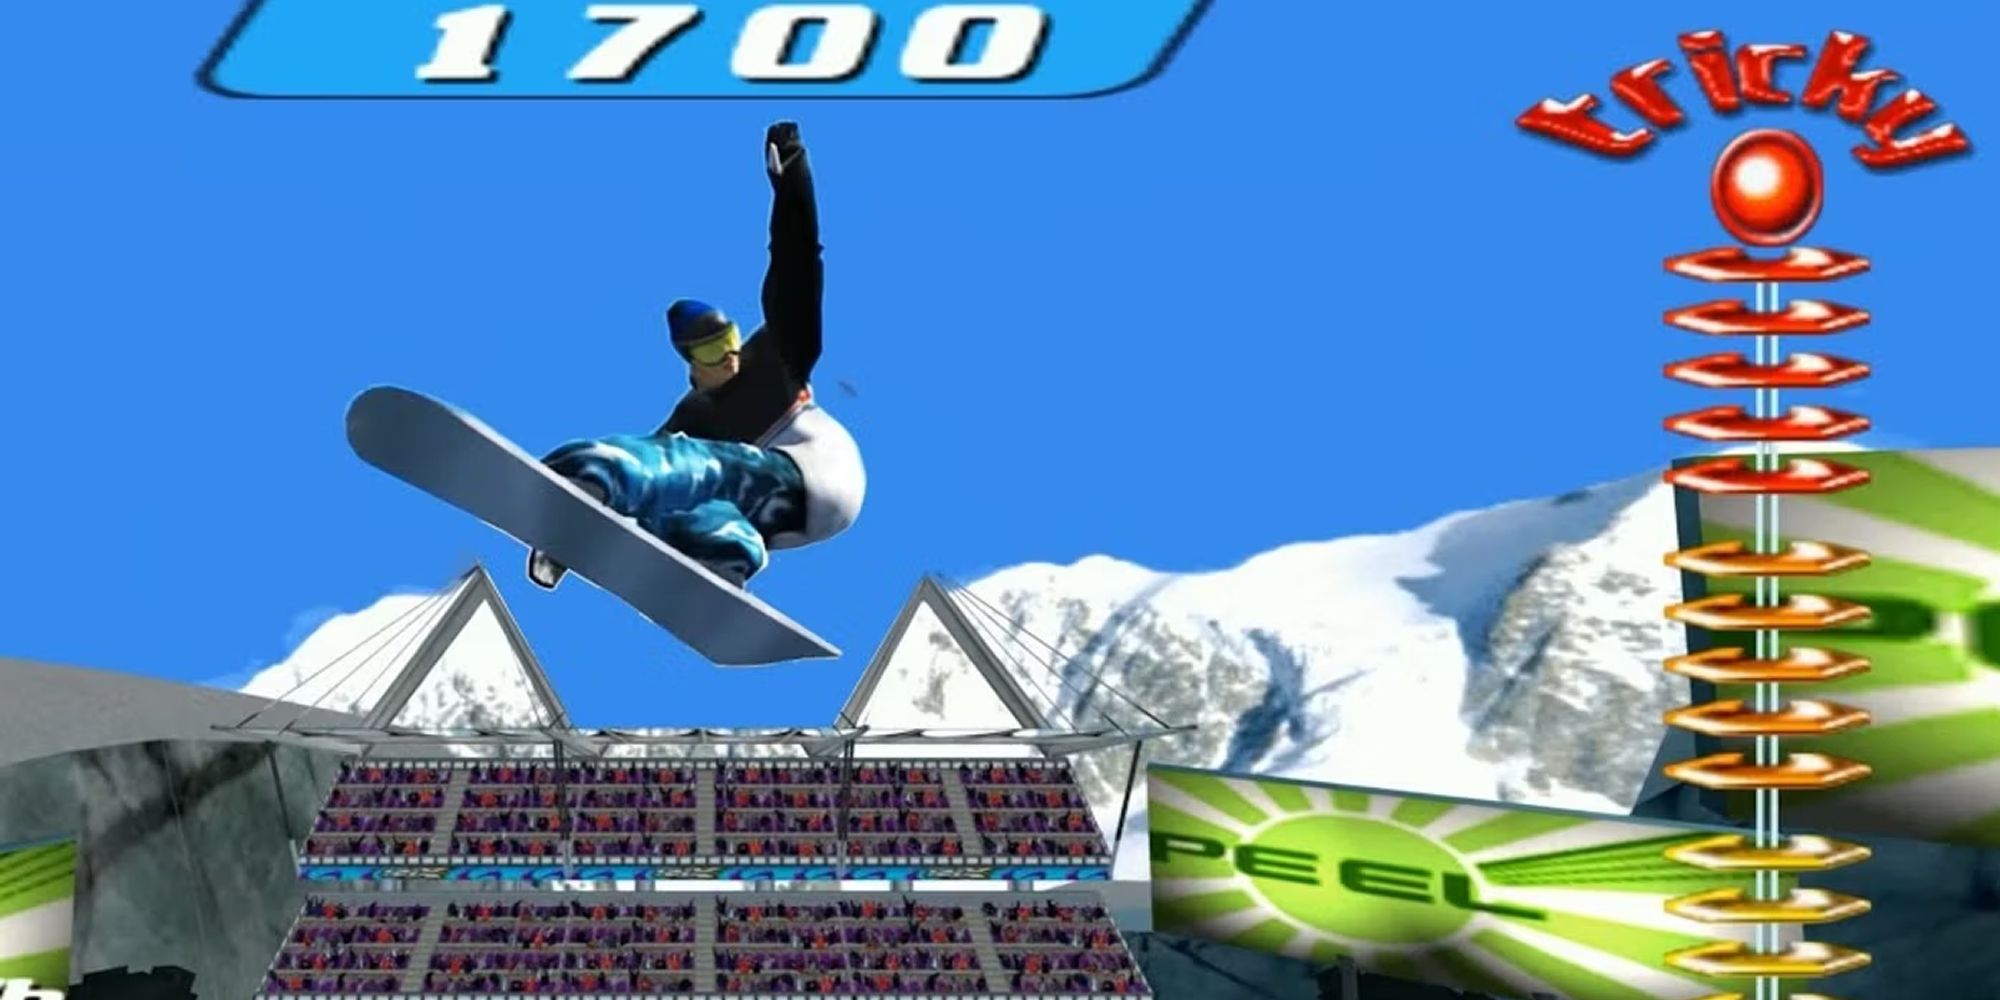 SSX Tricky Boarder Performs A Trick